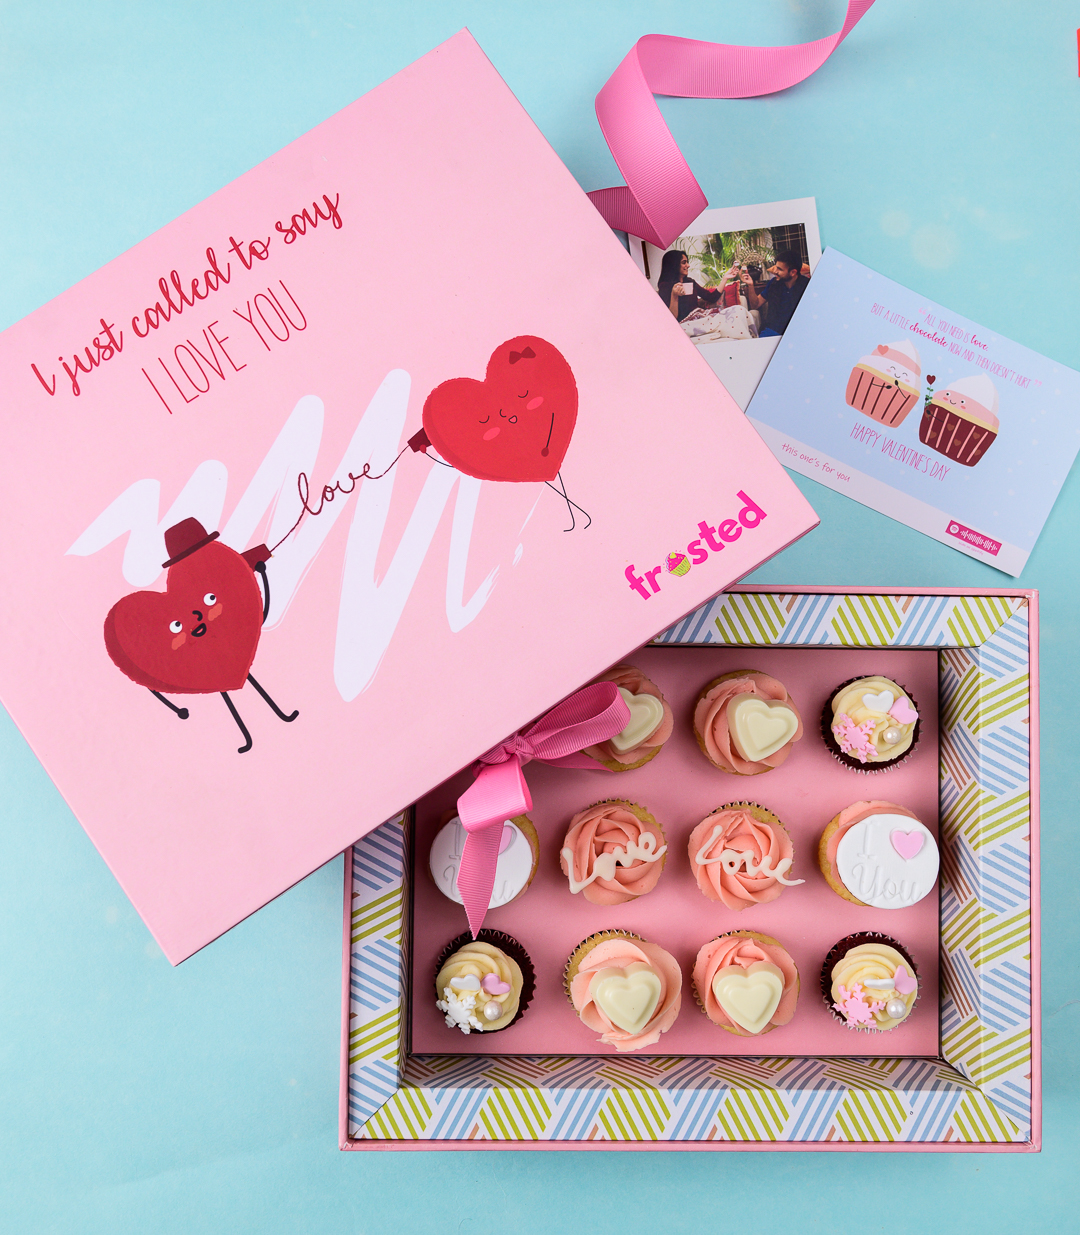 Most Adorable Gifts to Melt Her Heart This Valentine’s Day